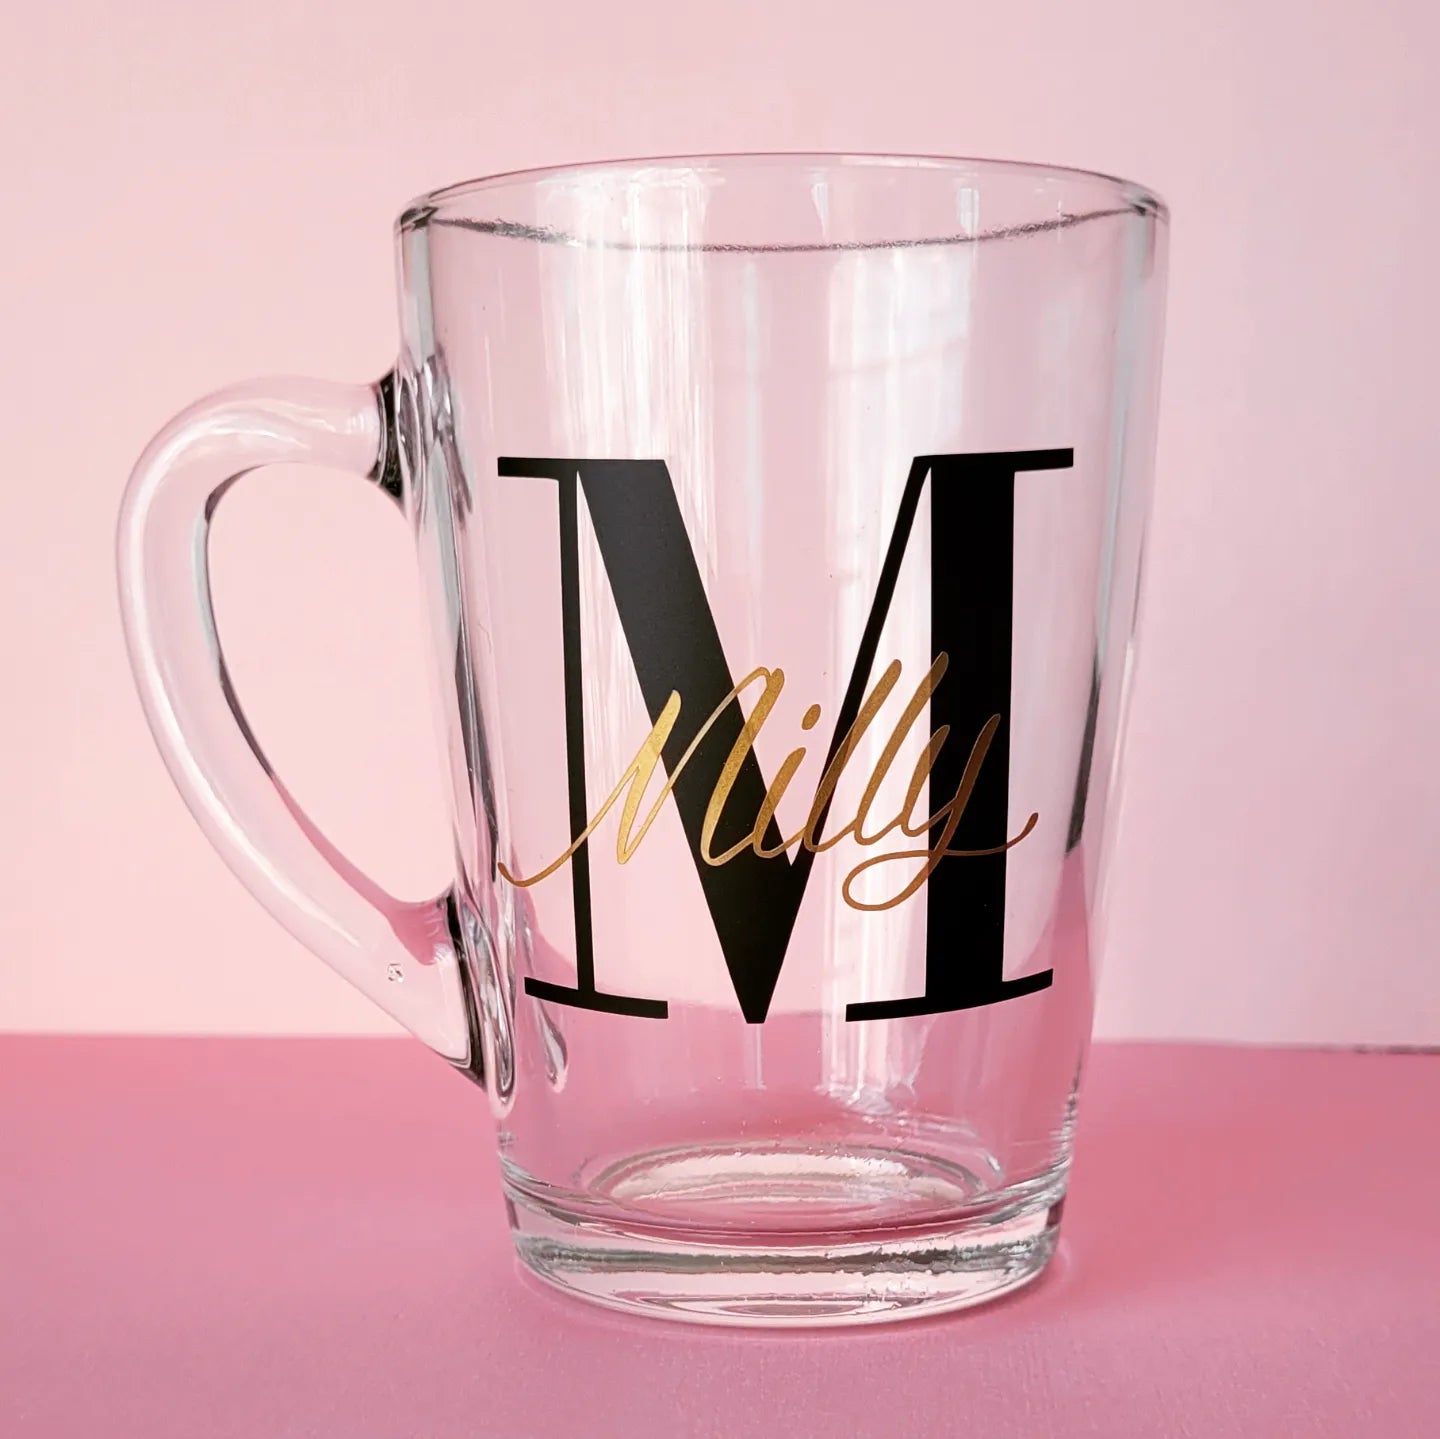 personalised glass mug. tempered glass. holds 320ml of liquid. black intital and gold written name. perfect for gifts